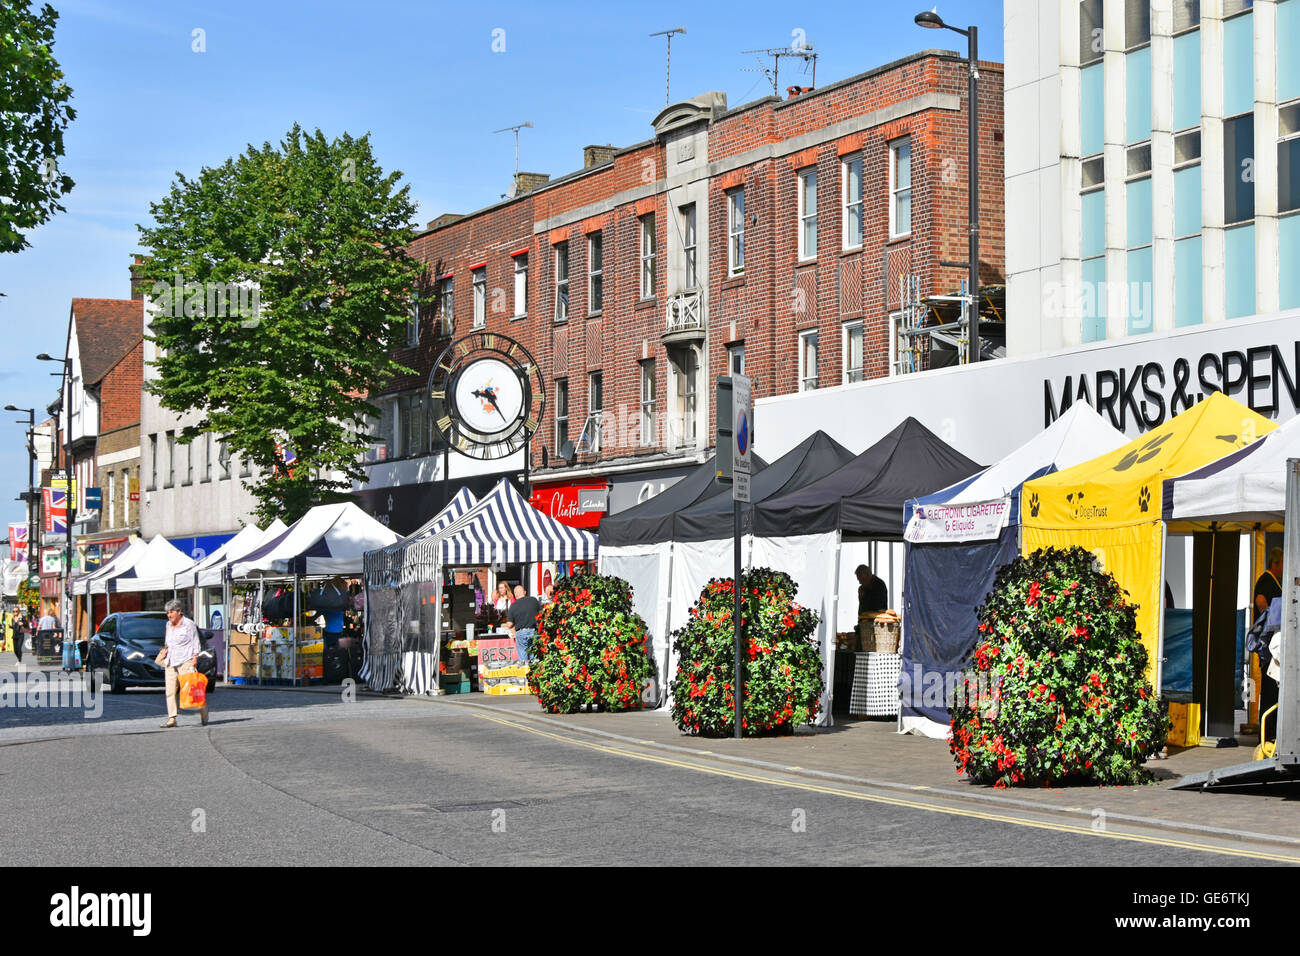 English town centre shopping High Street businesses with market stalls outside Marks and Spencer summer flower display & town clock Brentwood Essex UK Stock Photo